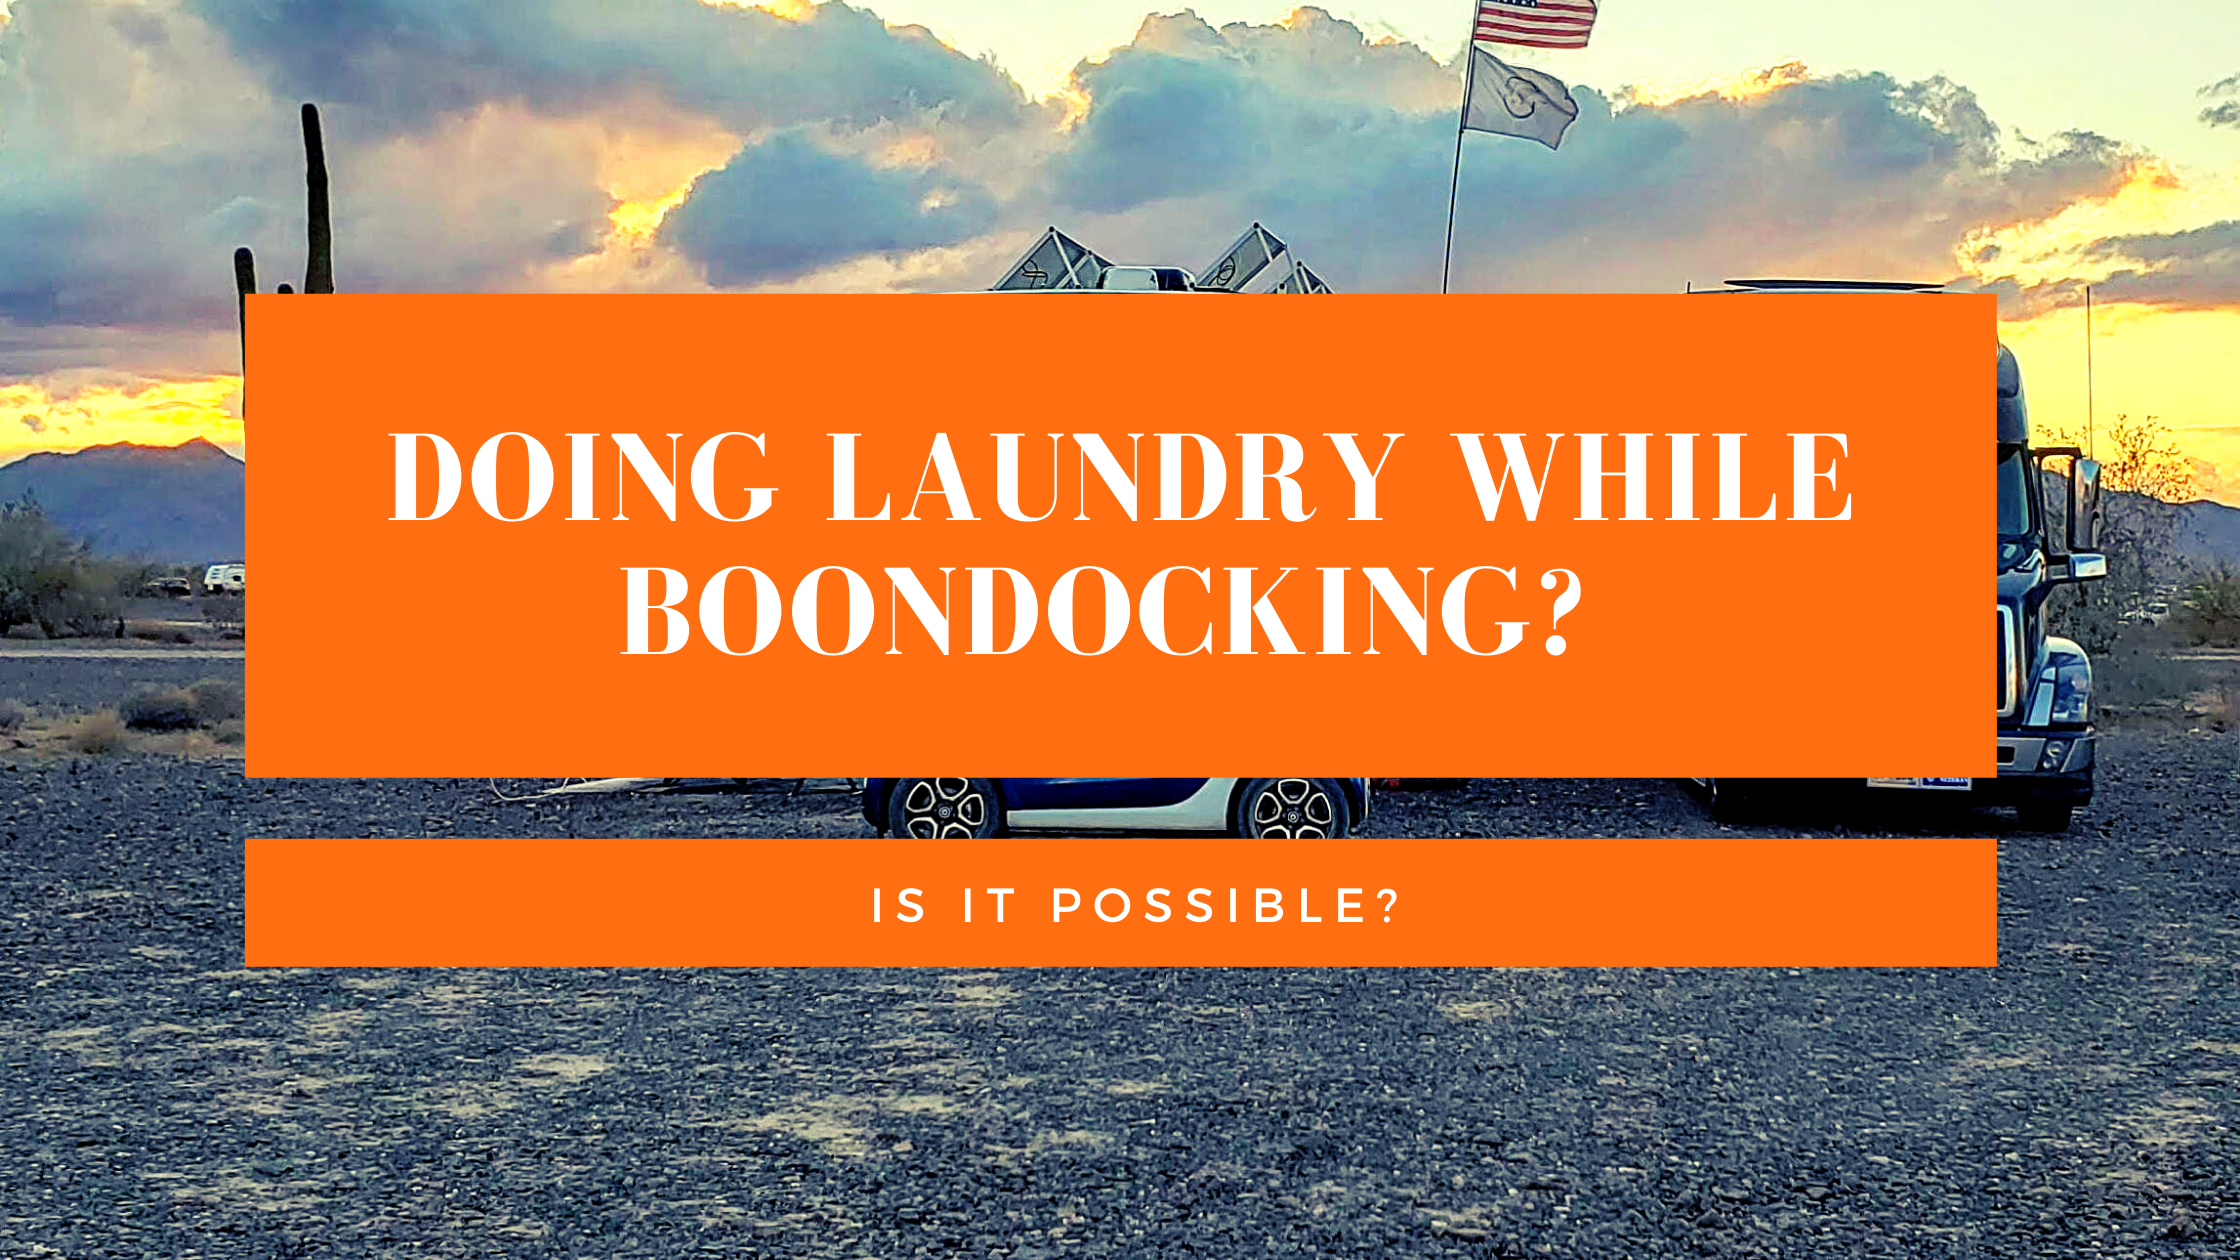 Doing Laundry Boondocking? Is it Possible?